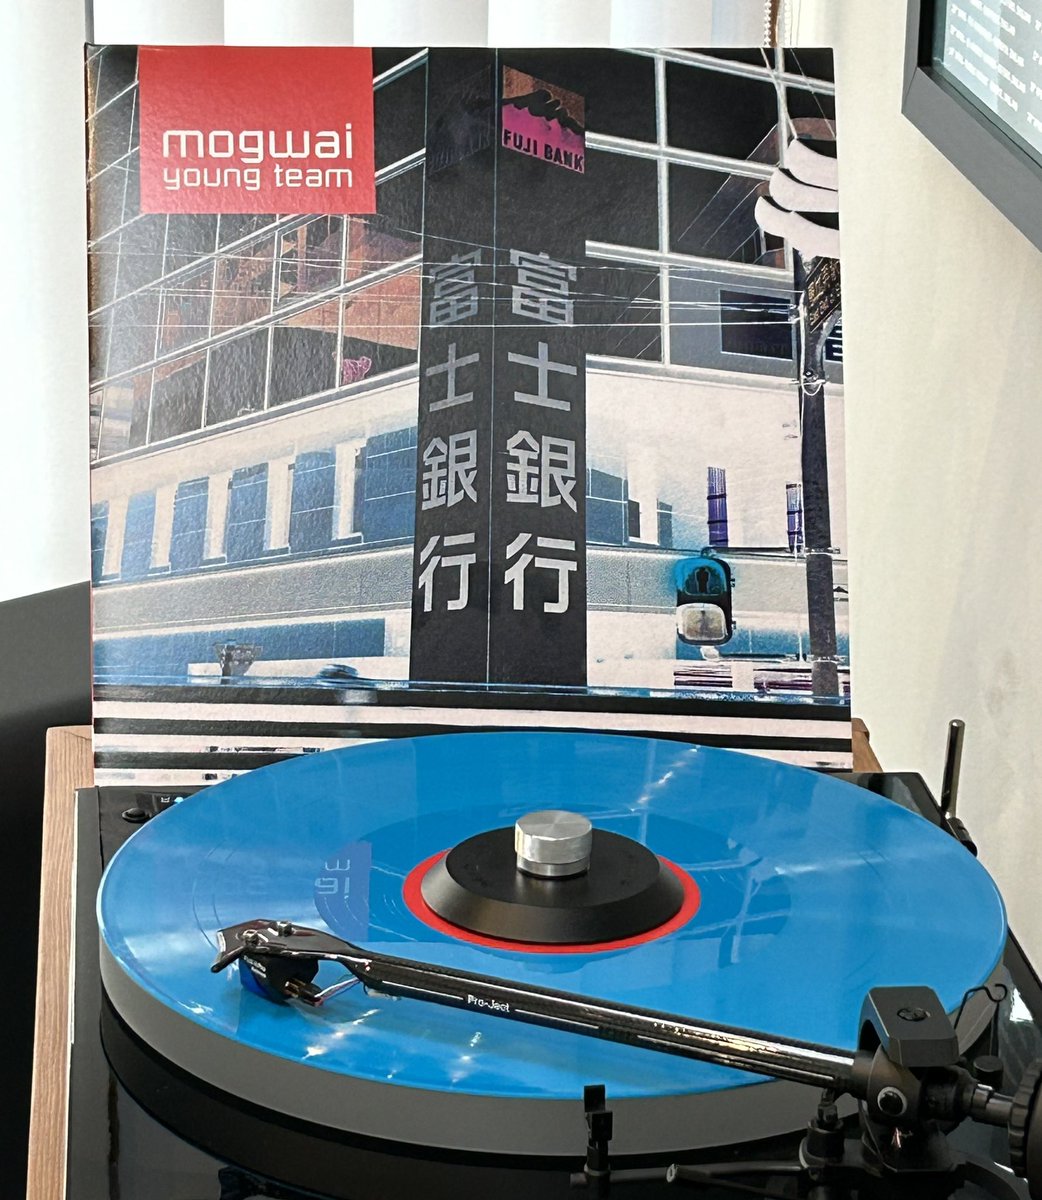 #5albums90s1 Finishing off the bank holiday with some Mogwai, spellbindingly good, what a debut 🔥proper chance of breaking into my 5..Like Herod still stops me in my tracks every single time 💙